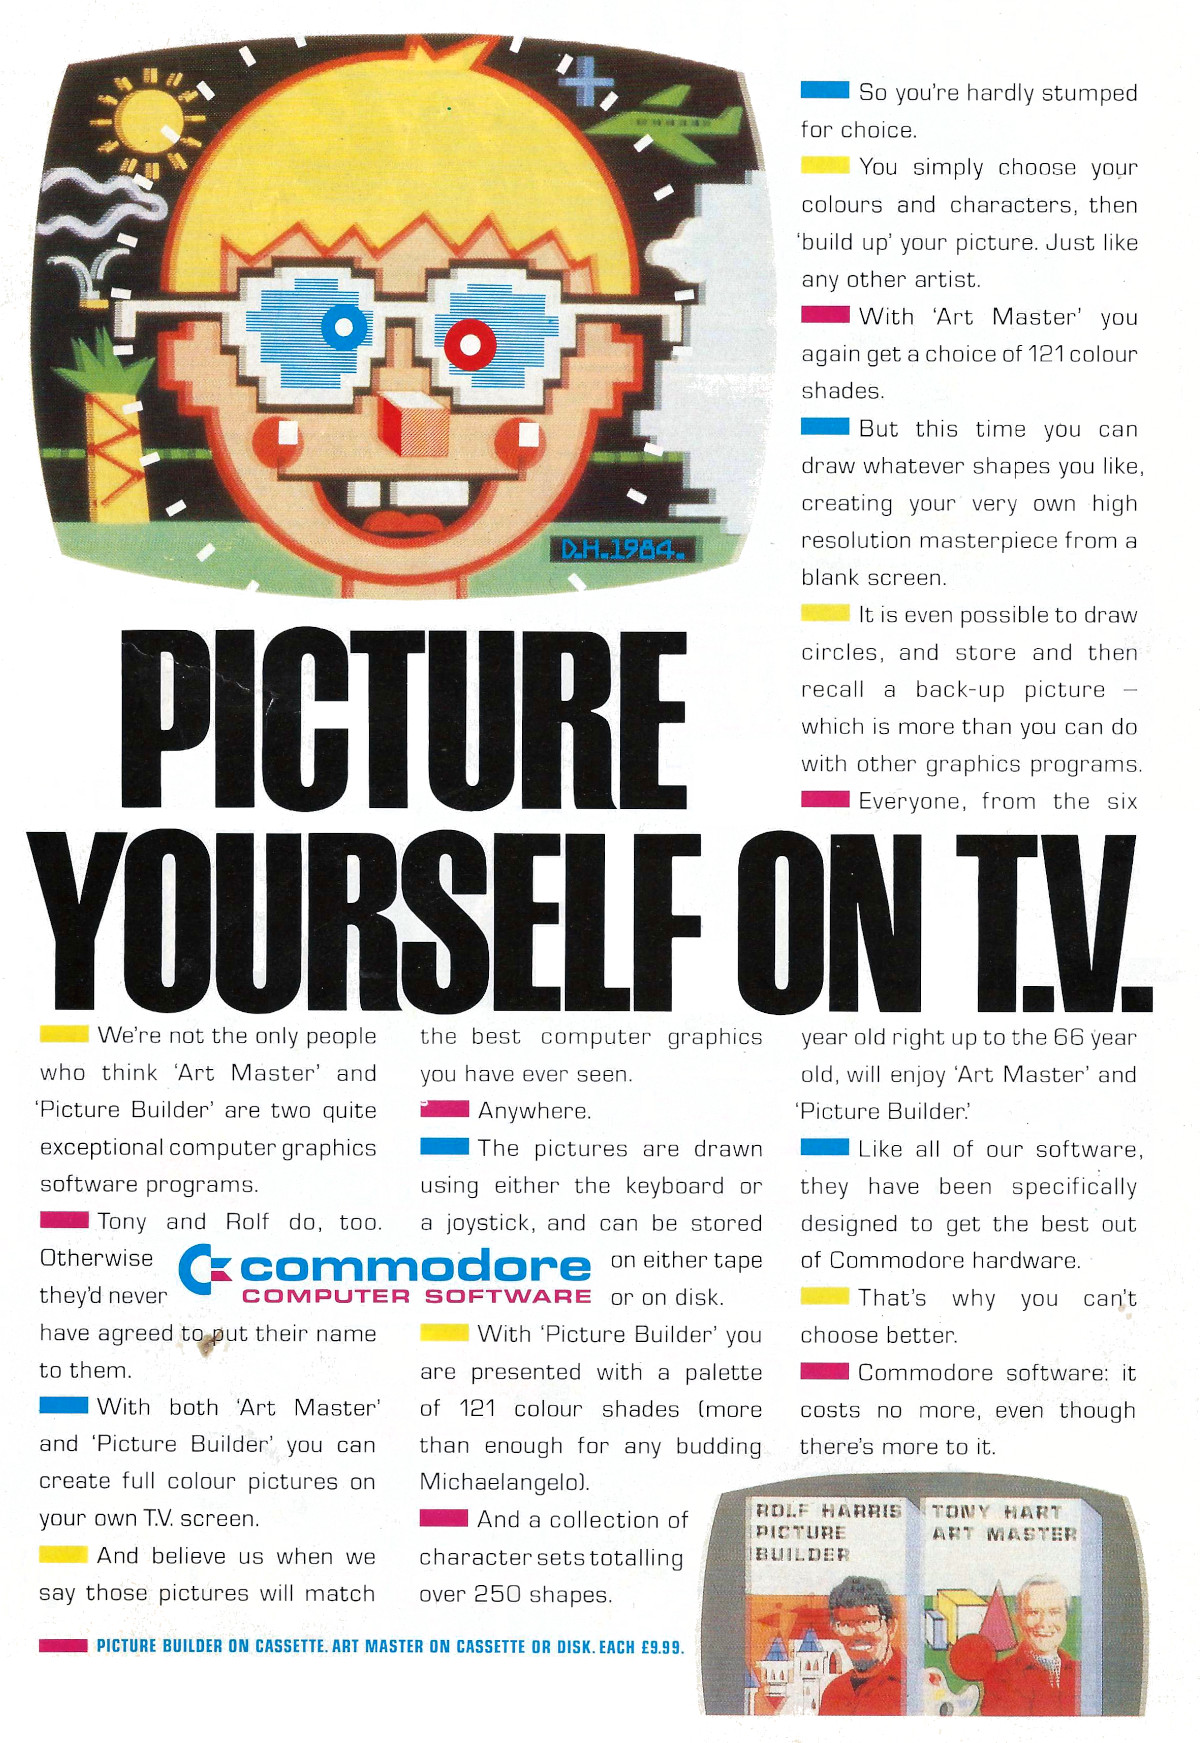 A <span class='hilite'>Commodore Computer</span> Software advert showing Rolf Harris's Picture Builder and Tony Hart's Art Master. From Commodore Computing International, November 1984